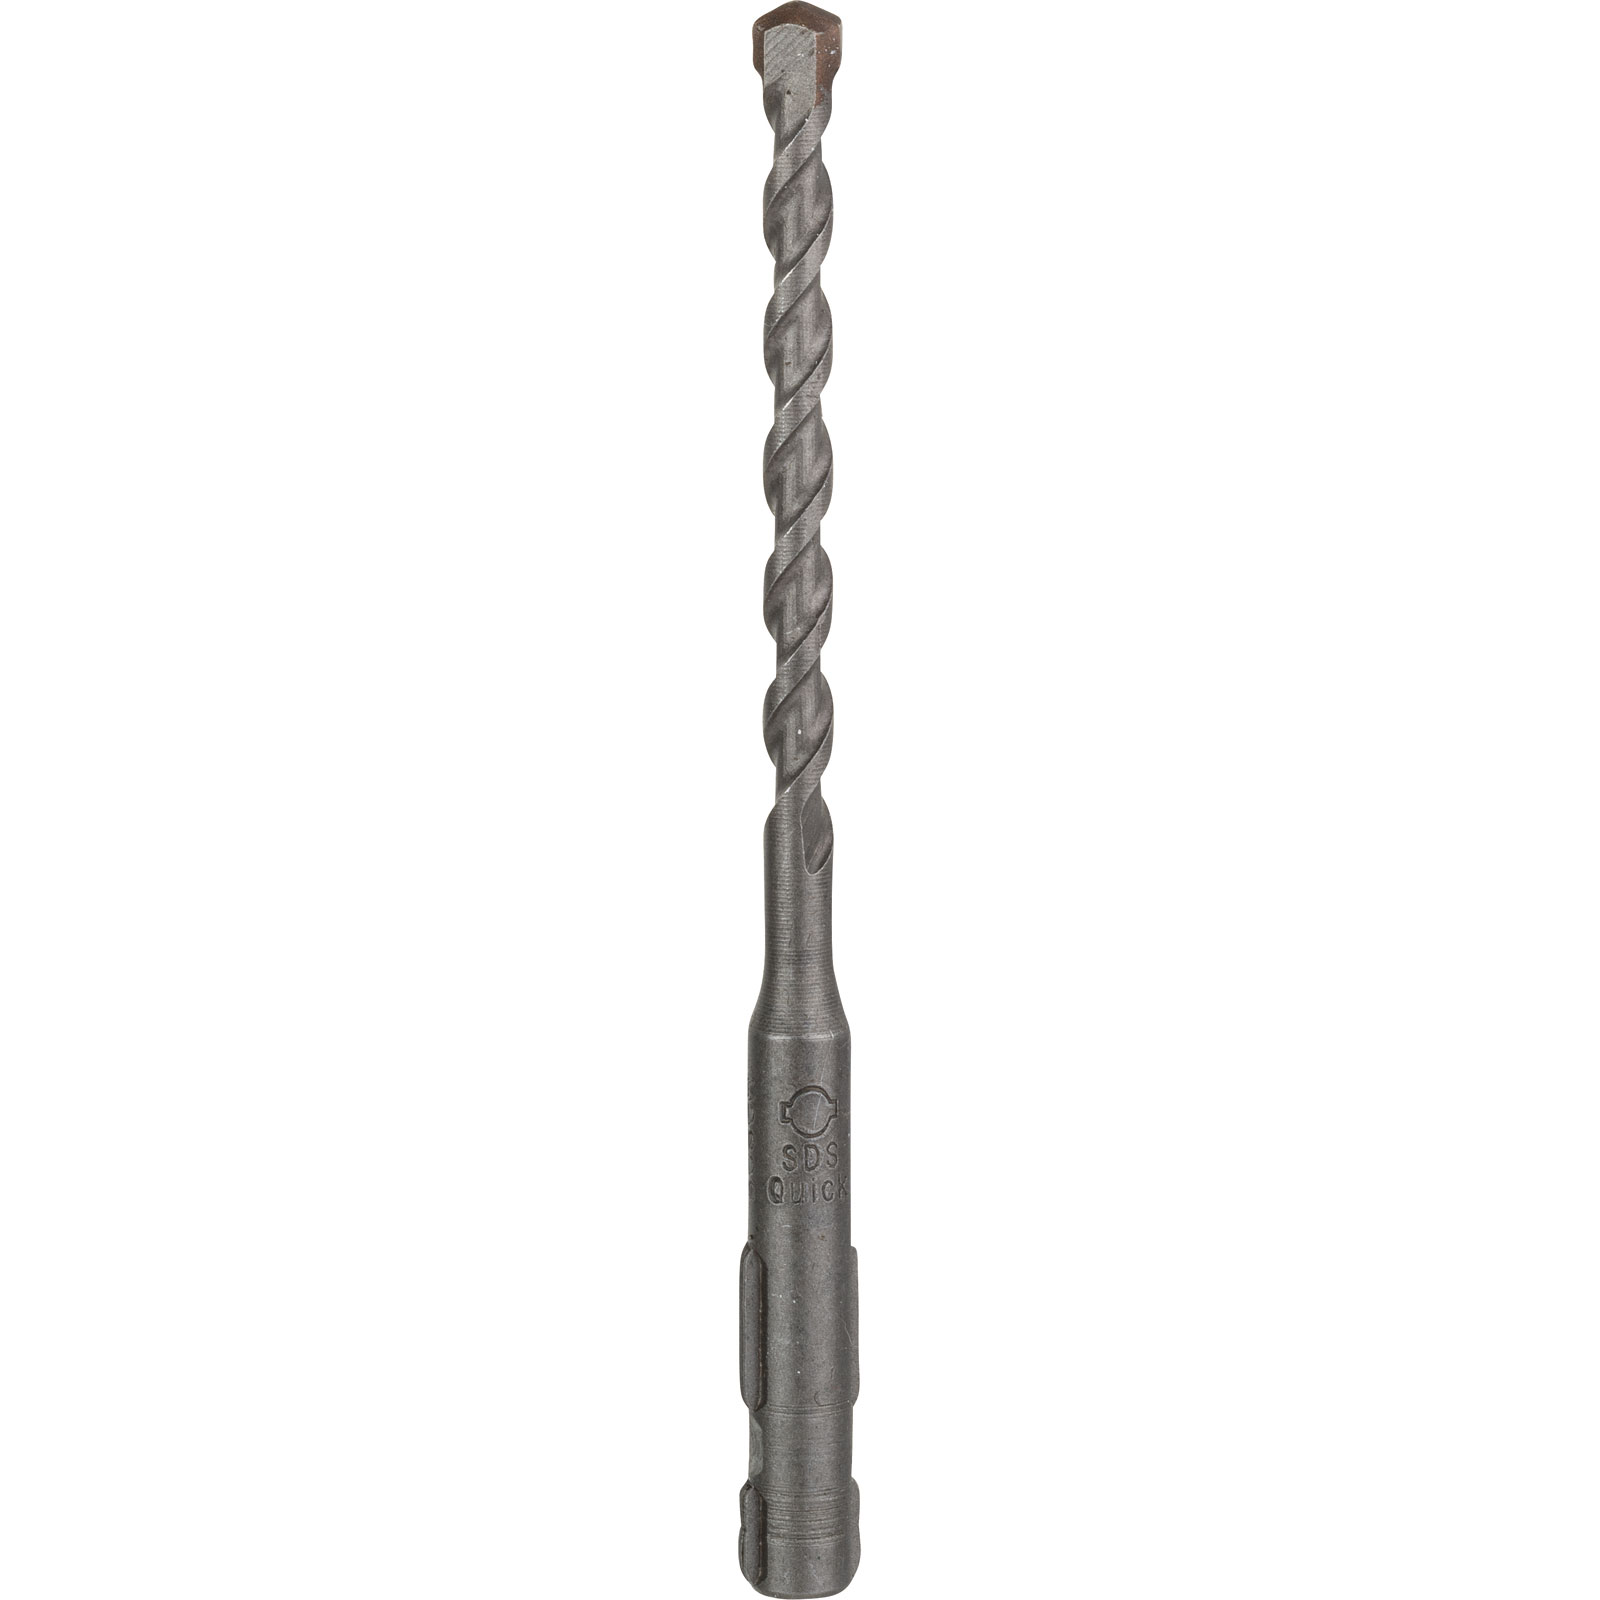 Photo of Bosch Uneo Sds Quick Masonary Drill Bit 5.5mm 100mm Pack Of 1